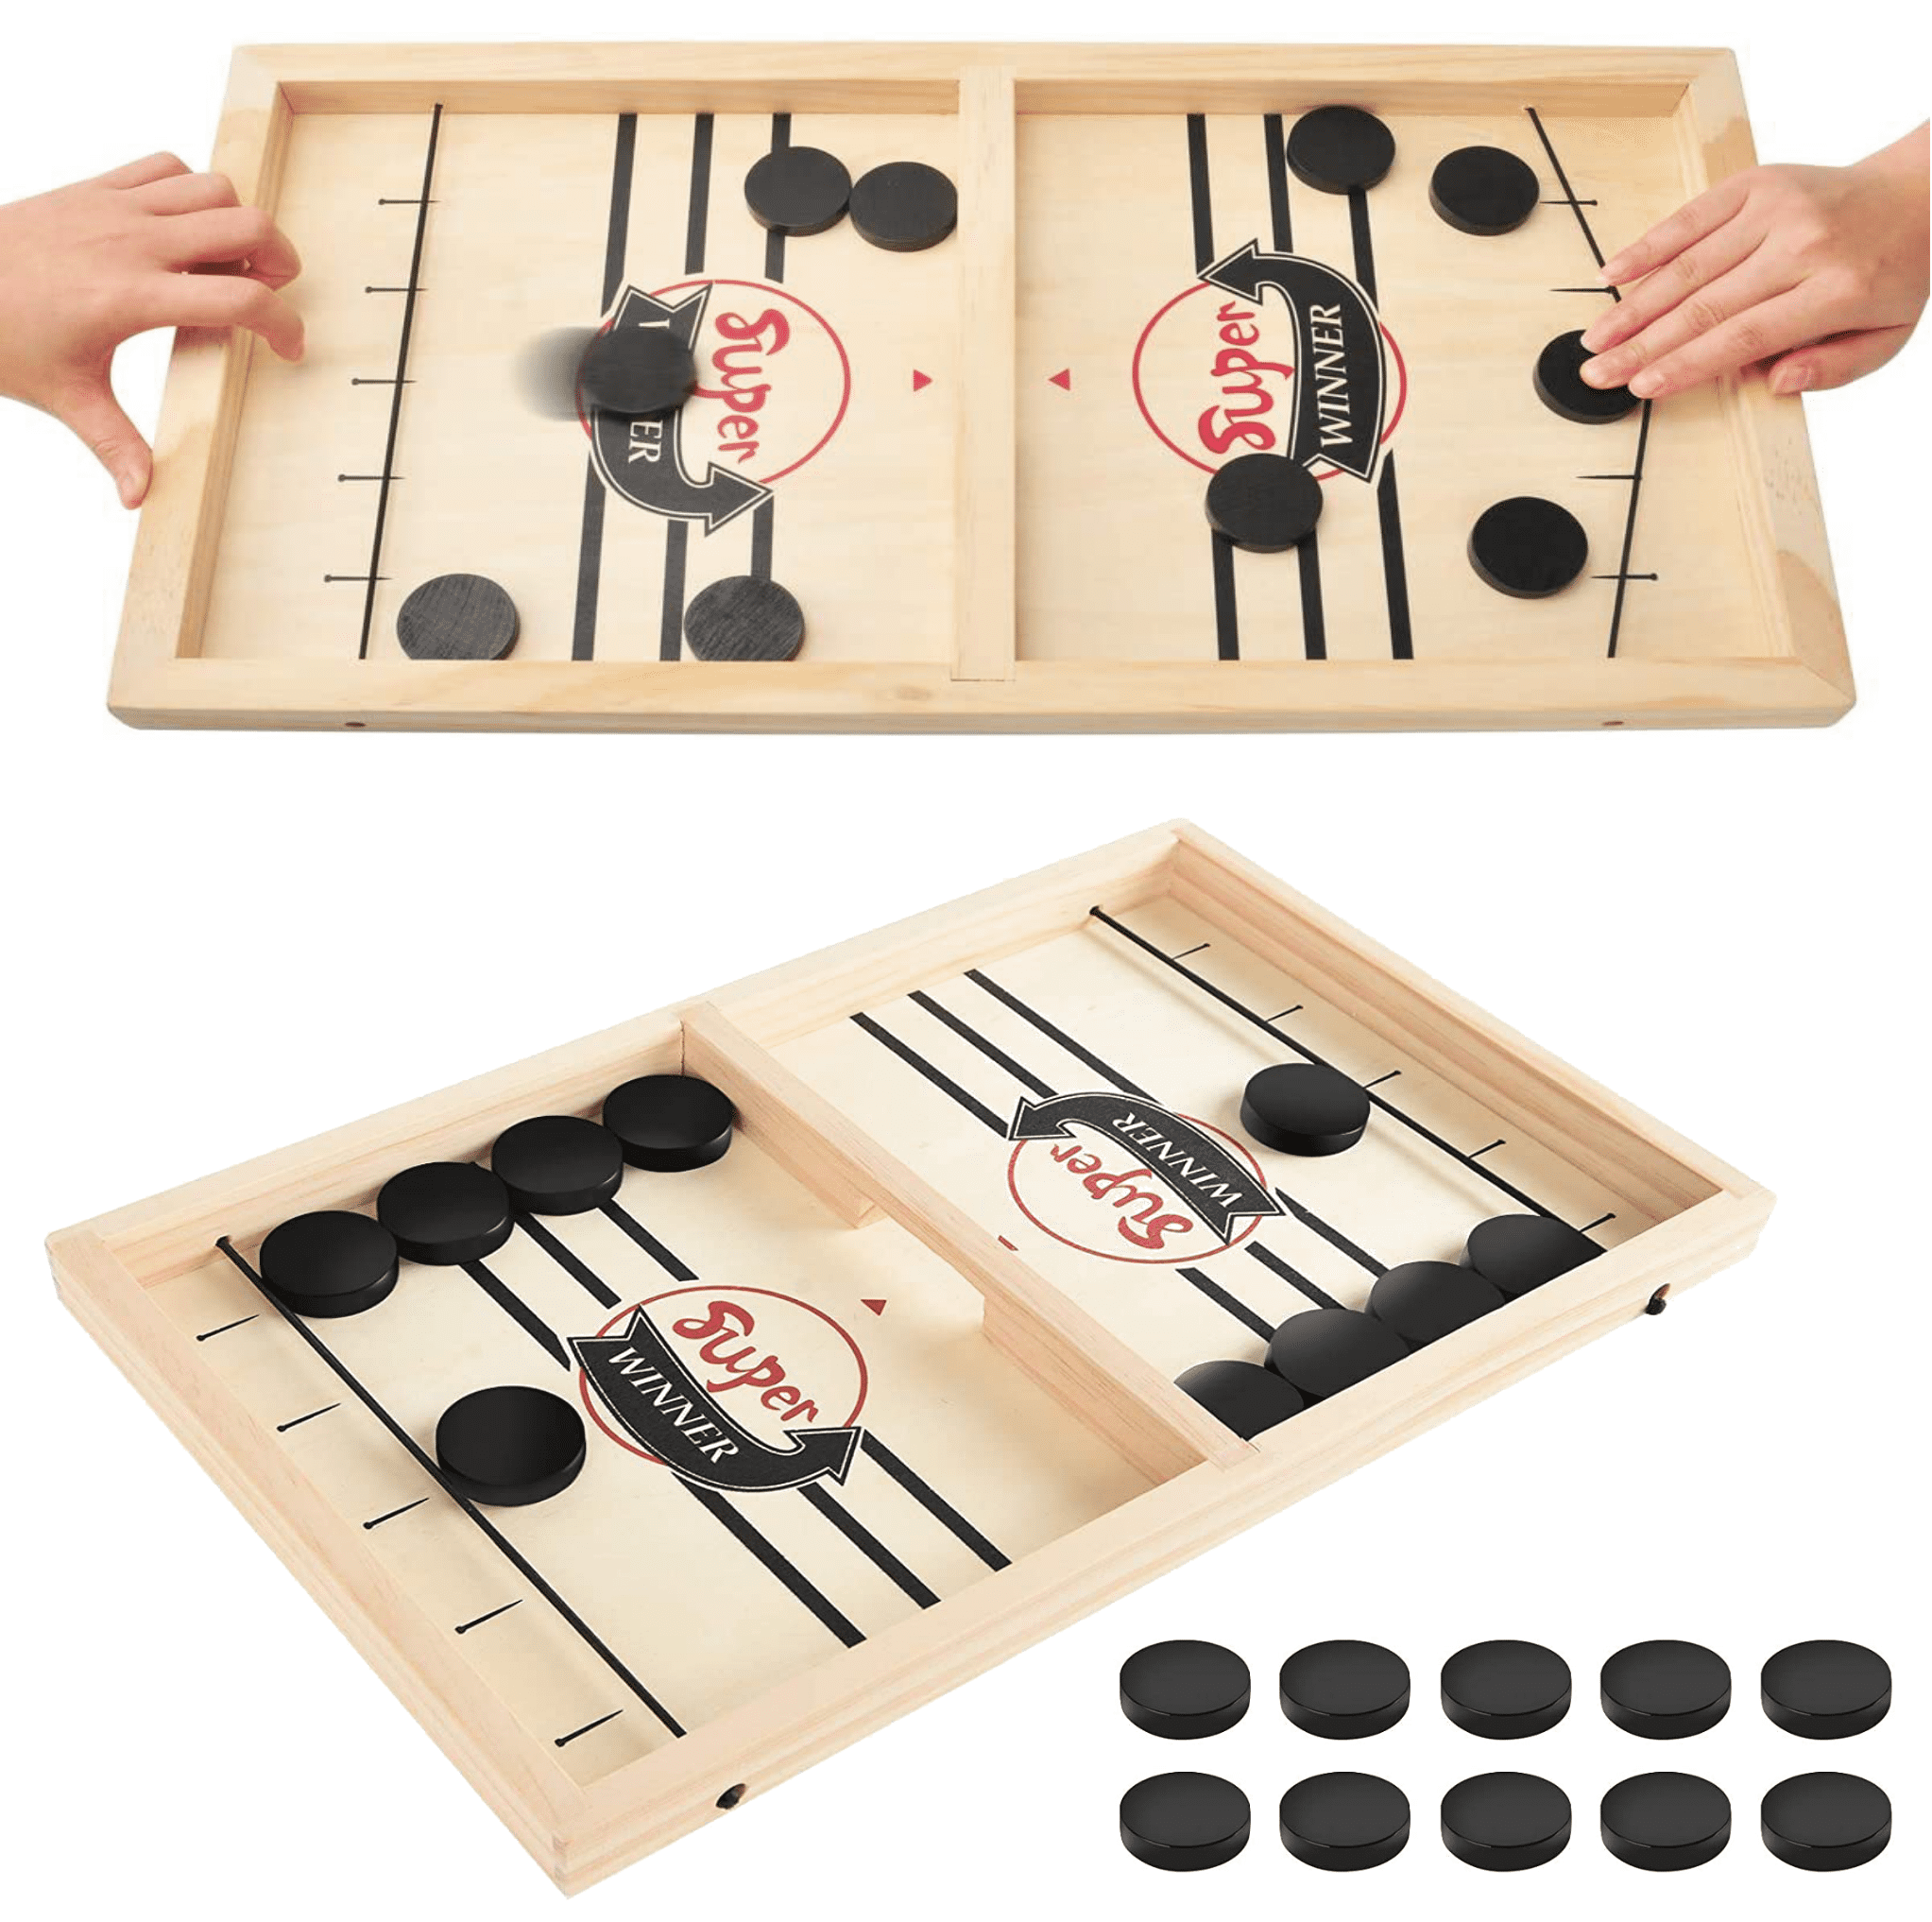 Sling Puck Game Paced SlingPuck Winner Board Family Games Toys Game F.h 